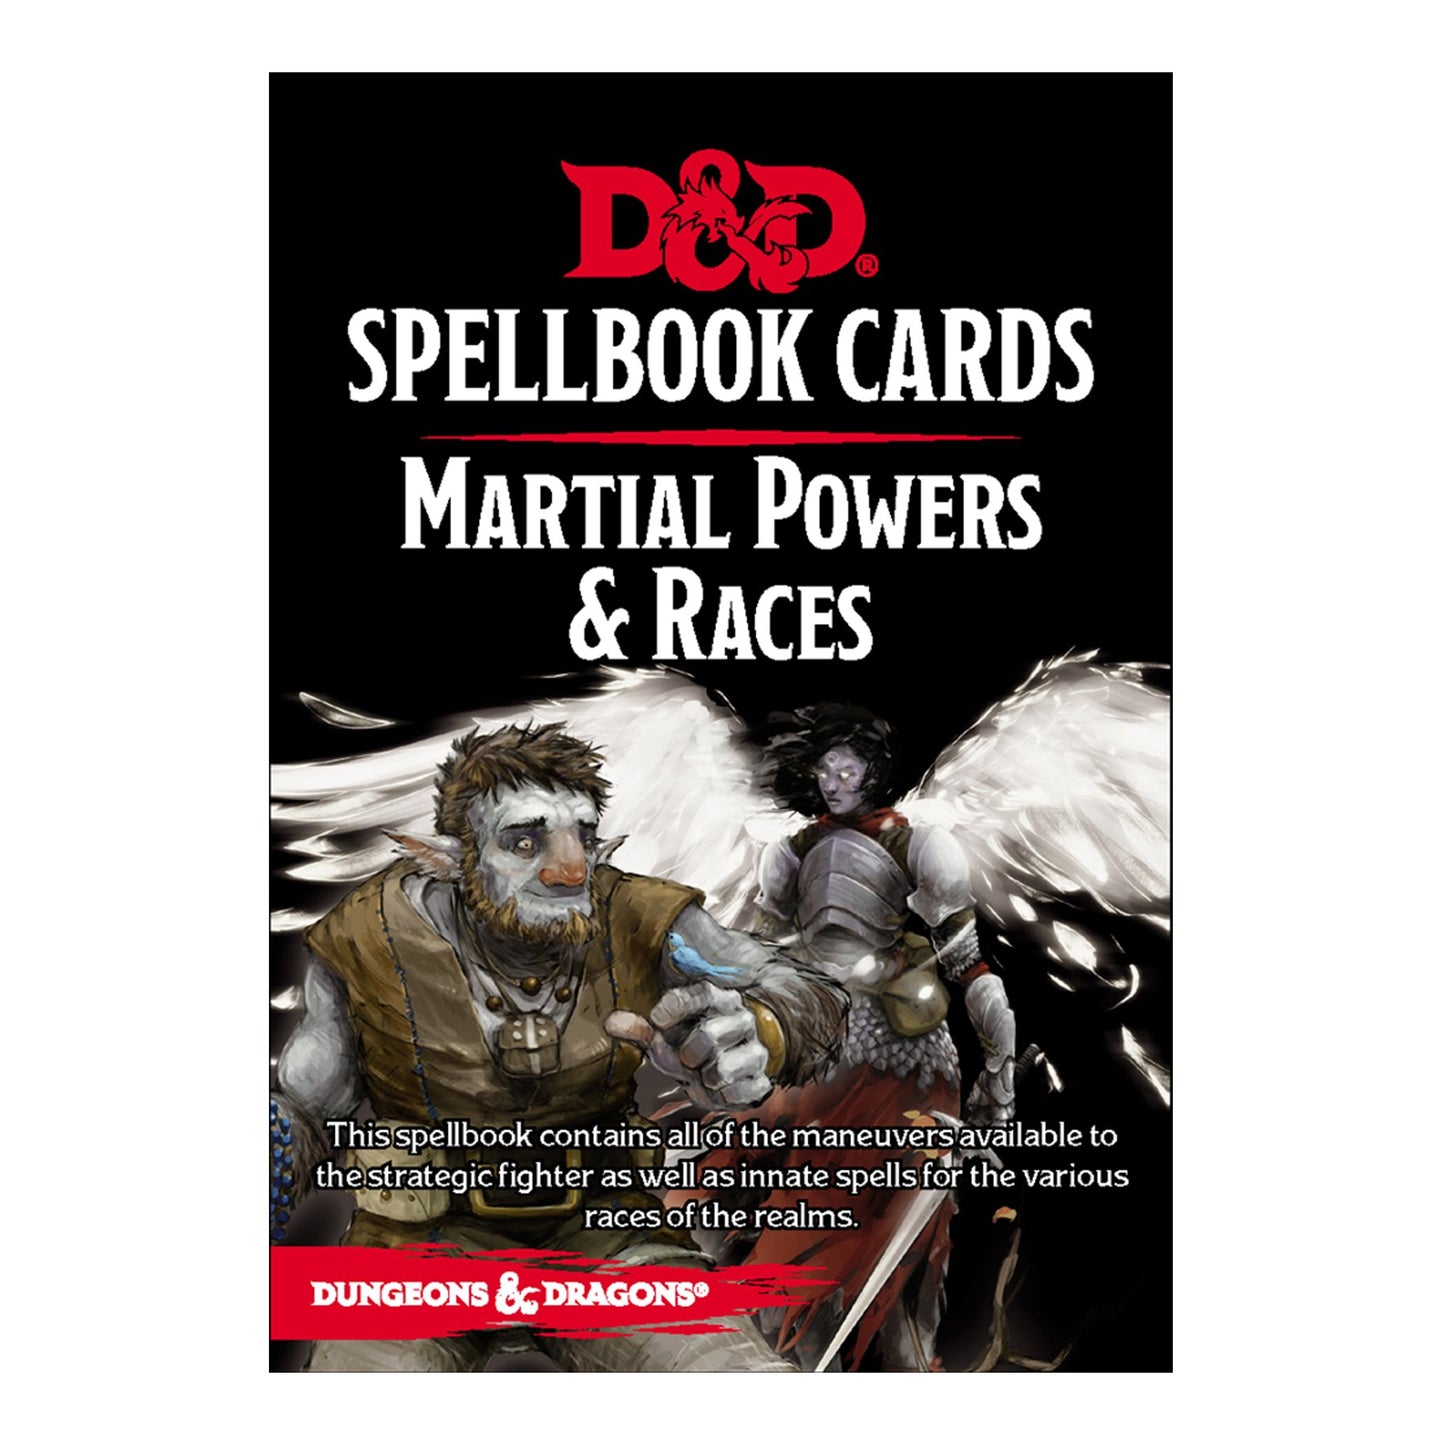 Dungeon & Dragons - Spellbook Cards - Martial Powers & Races